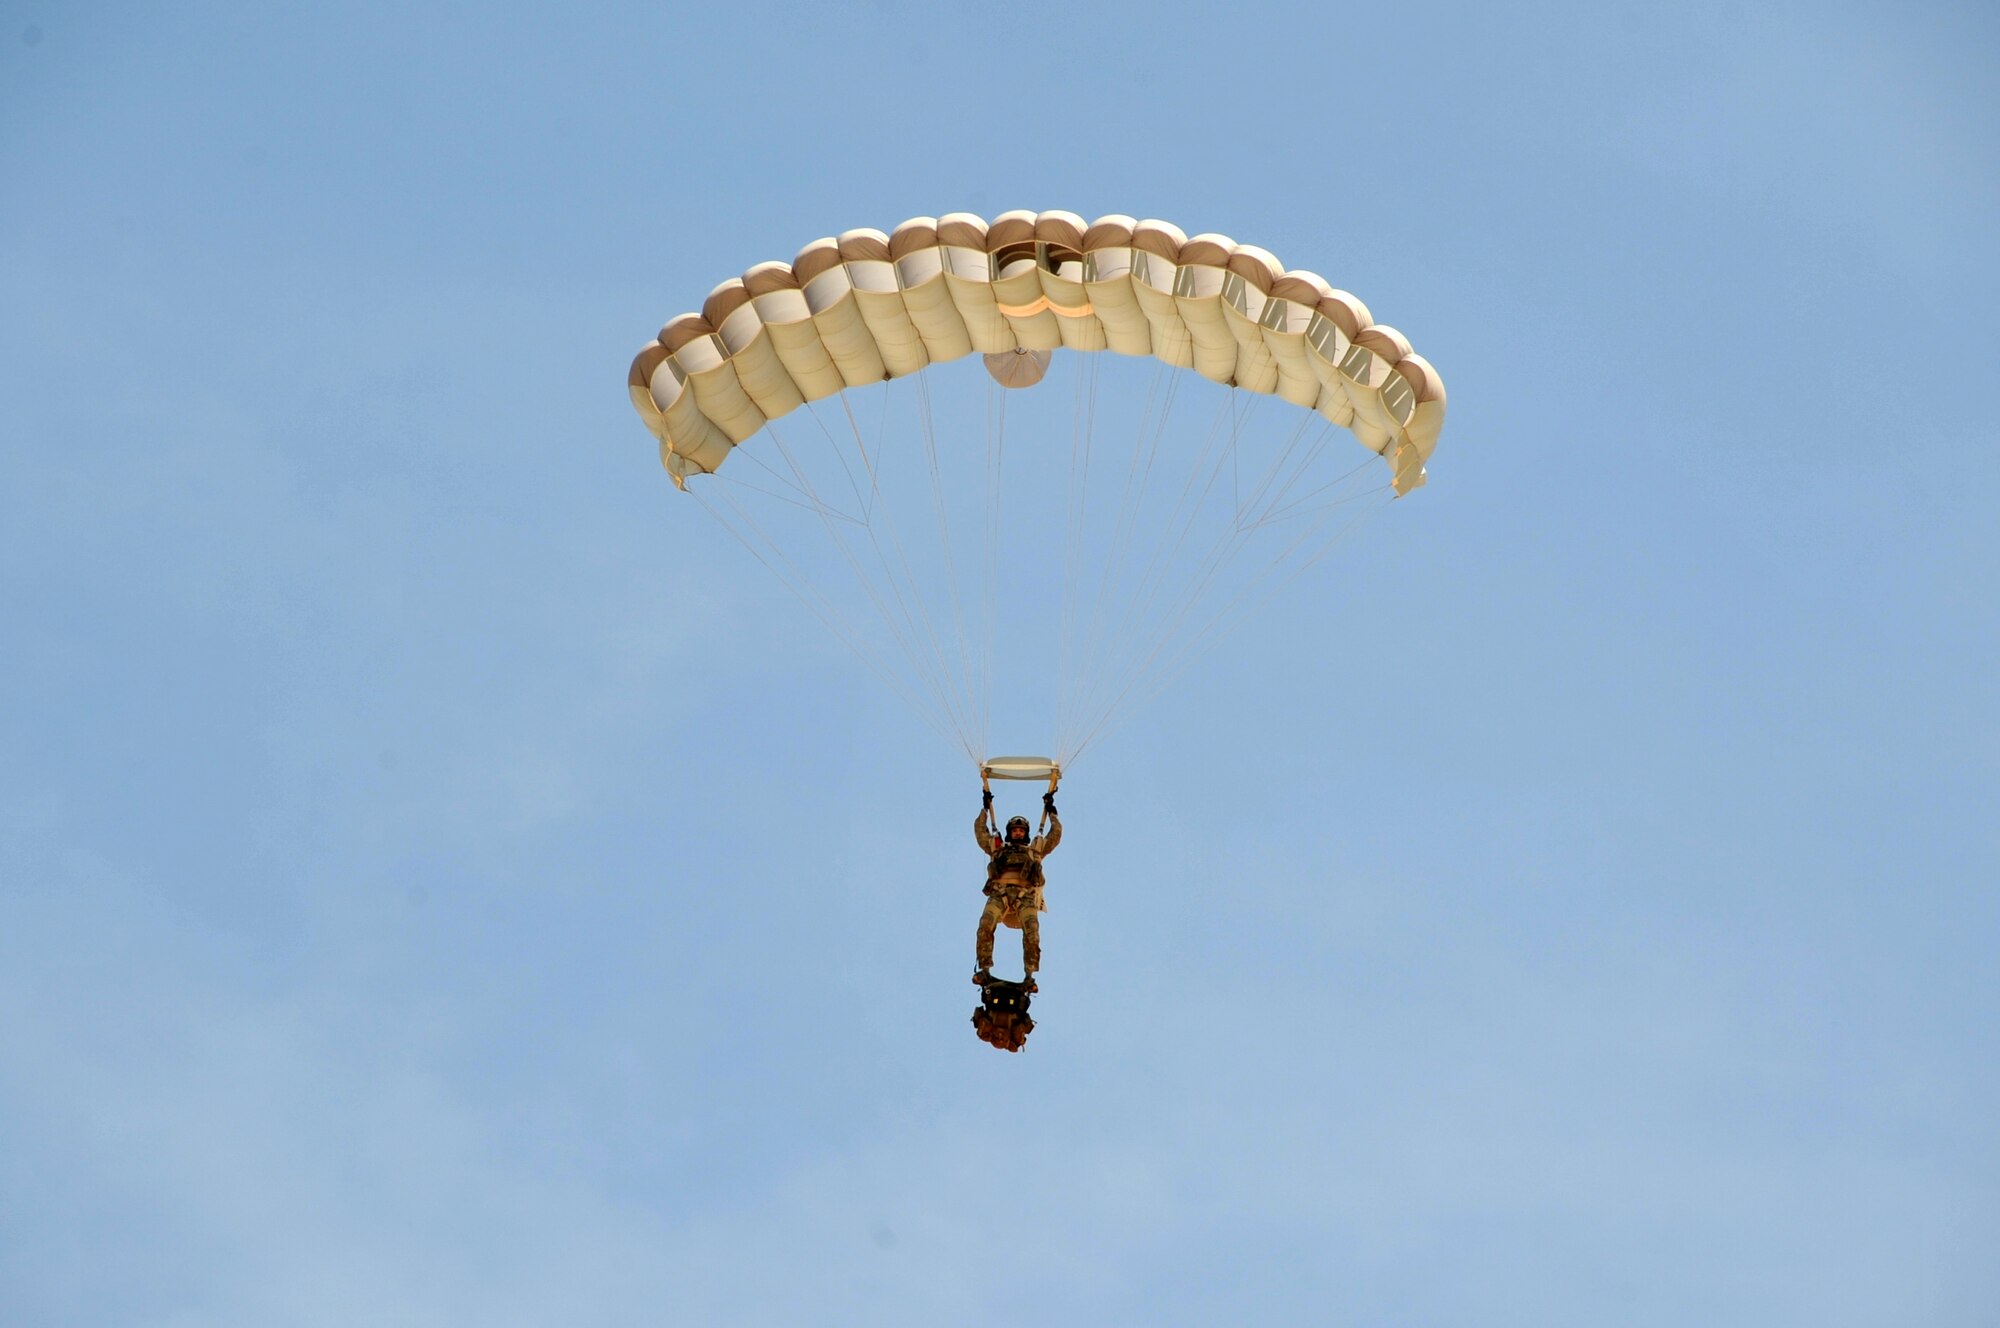 A pararescueman assigned to the 306th Rescue Squadron descends on Eloy, Ariz., during training May 14. Air Force pararescuemen, also known as PJs, are the only Department of Defense elite combat forces specifically organized, trained, equipped and postured to conduct full-spectrum personnel recovery to include both conventional and unconventional combat rescue operations. These battlefield Airmen are the most highly trained and versatile personnel recovery specialists in the world. Pararescue is the nation's force of choice to execute the most perilous, demanding and extreme rescue missions anytime, anywhere across the globe.  (U.S. Air Force photo by Tech. Sgt. Carolyn Herrick)